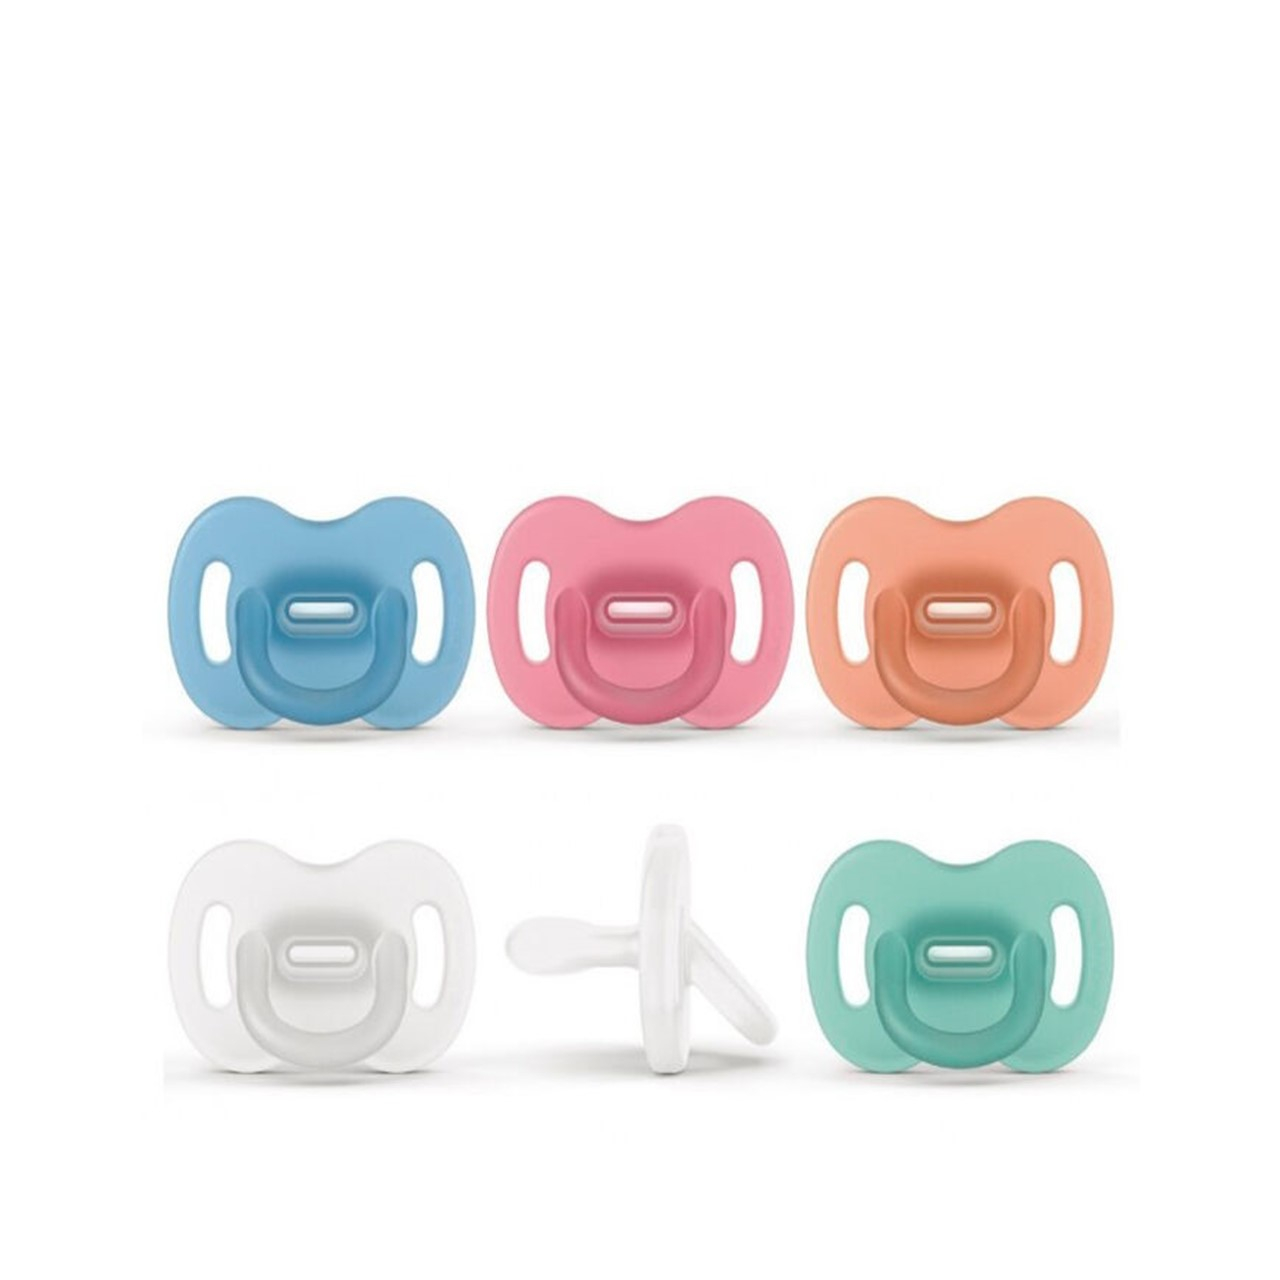 https://static.beautytocare.com/media/catalog/product/s/u/suavinex-smoothie-physiological-pacifier-all-silicone-6-18m-x1.jpg